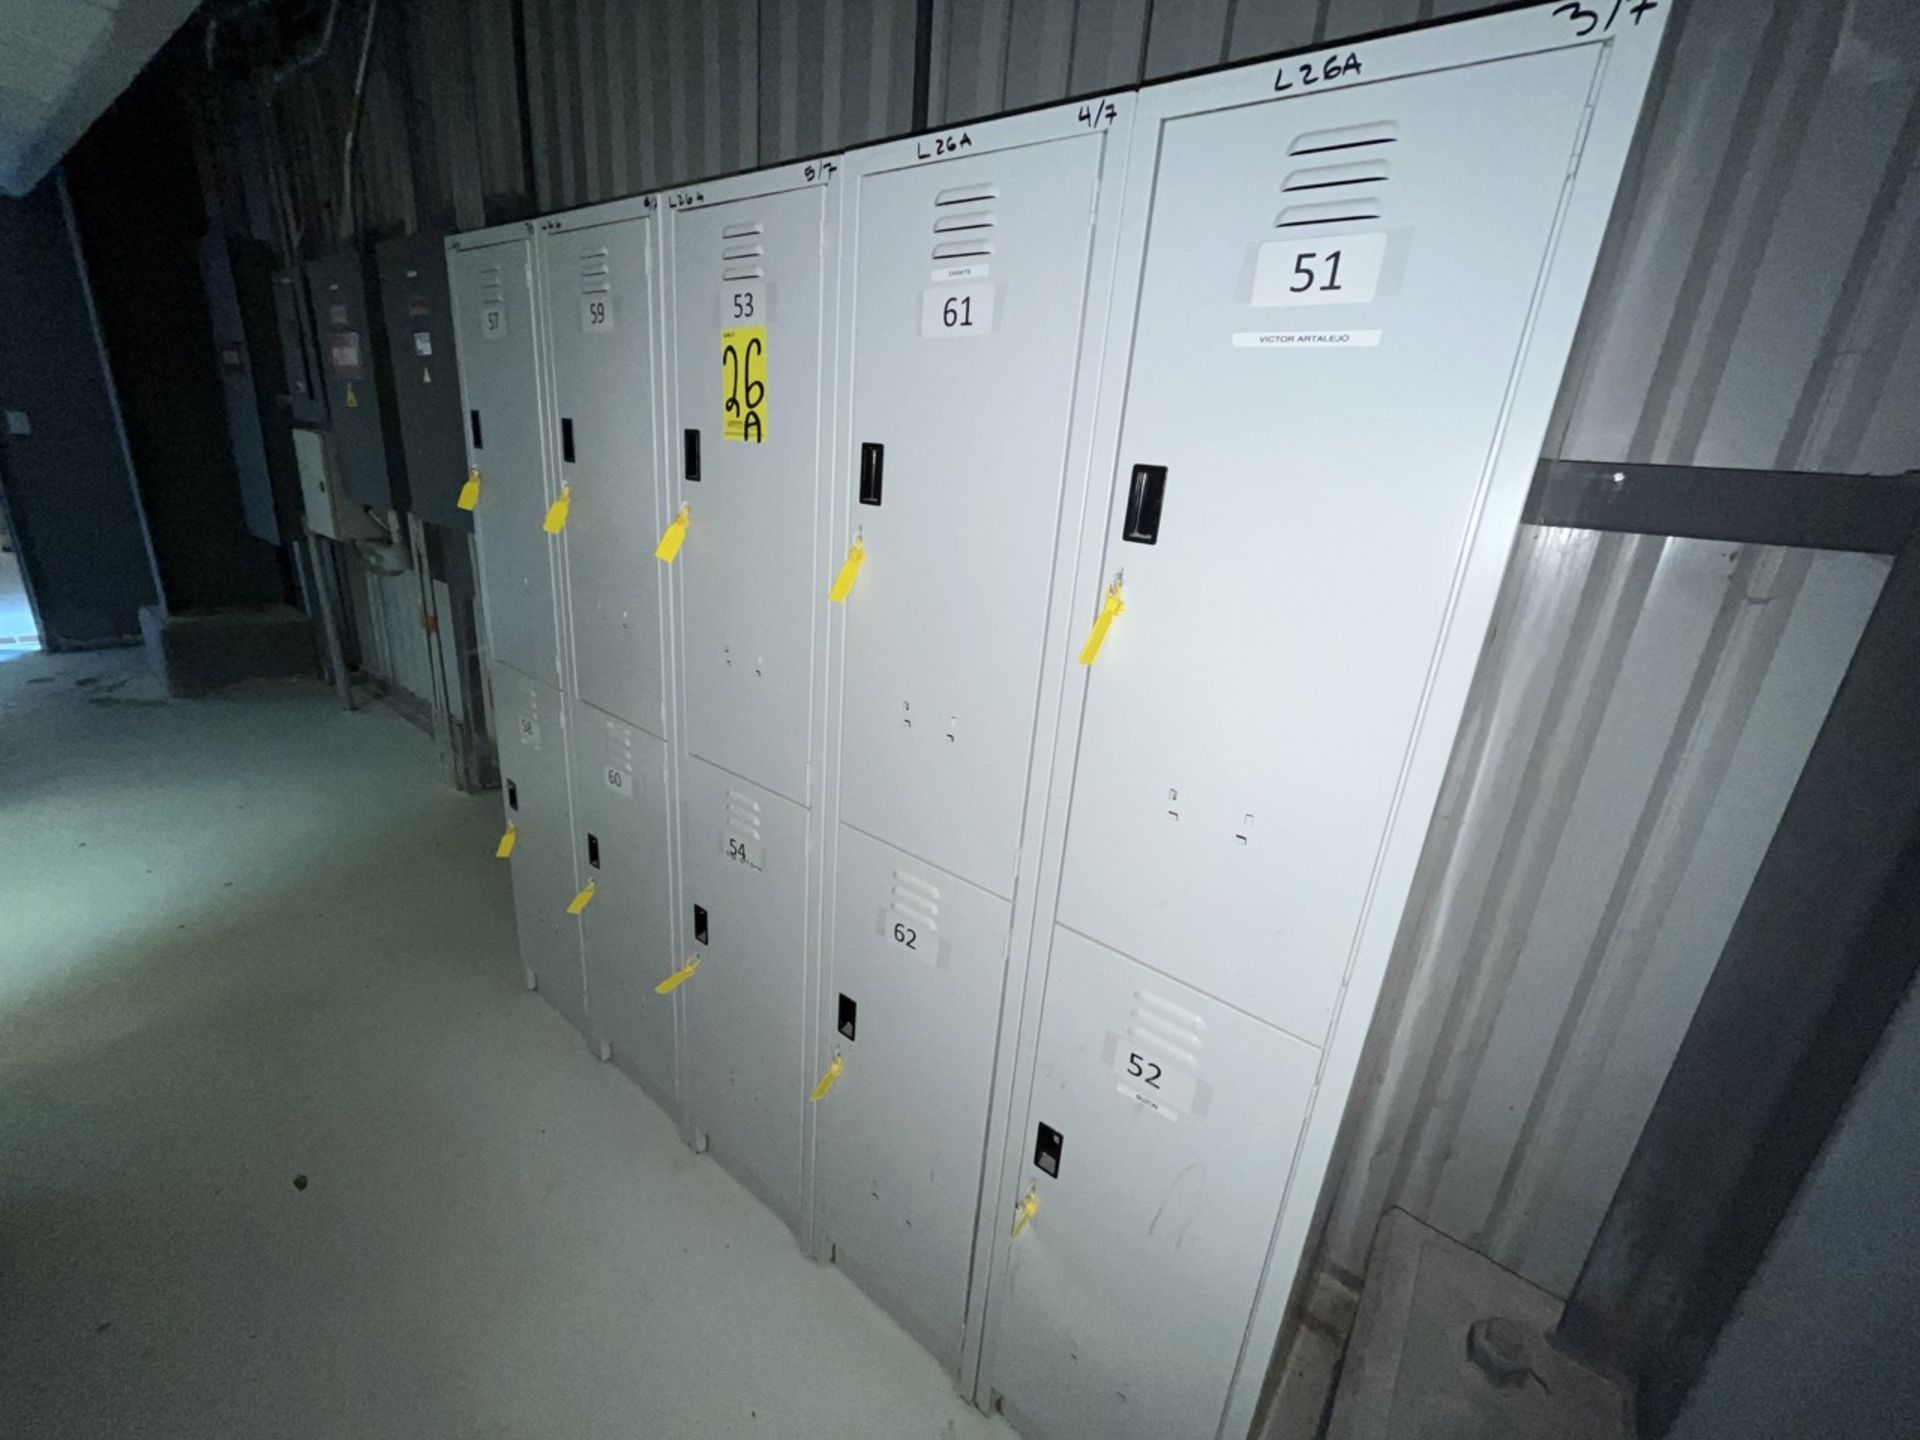 Lot of 7 storage lockers of 2 spaces each, measuring approximately 0.40 x 0.40 x 1.80 meters. / Lo - Image 2 of 8